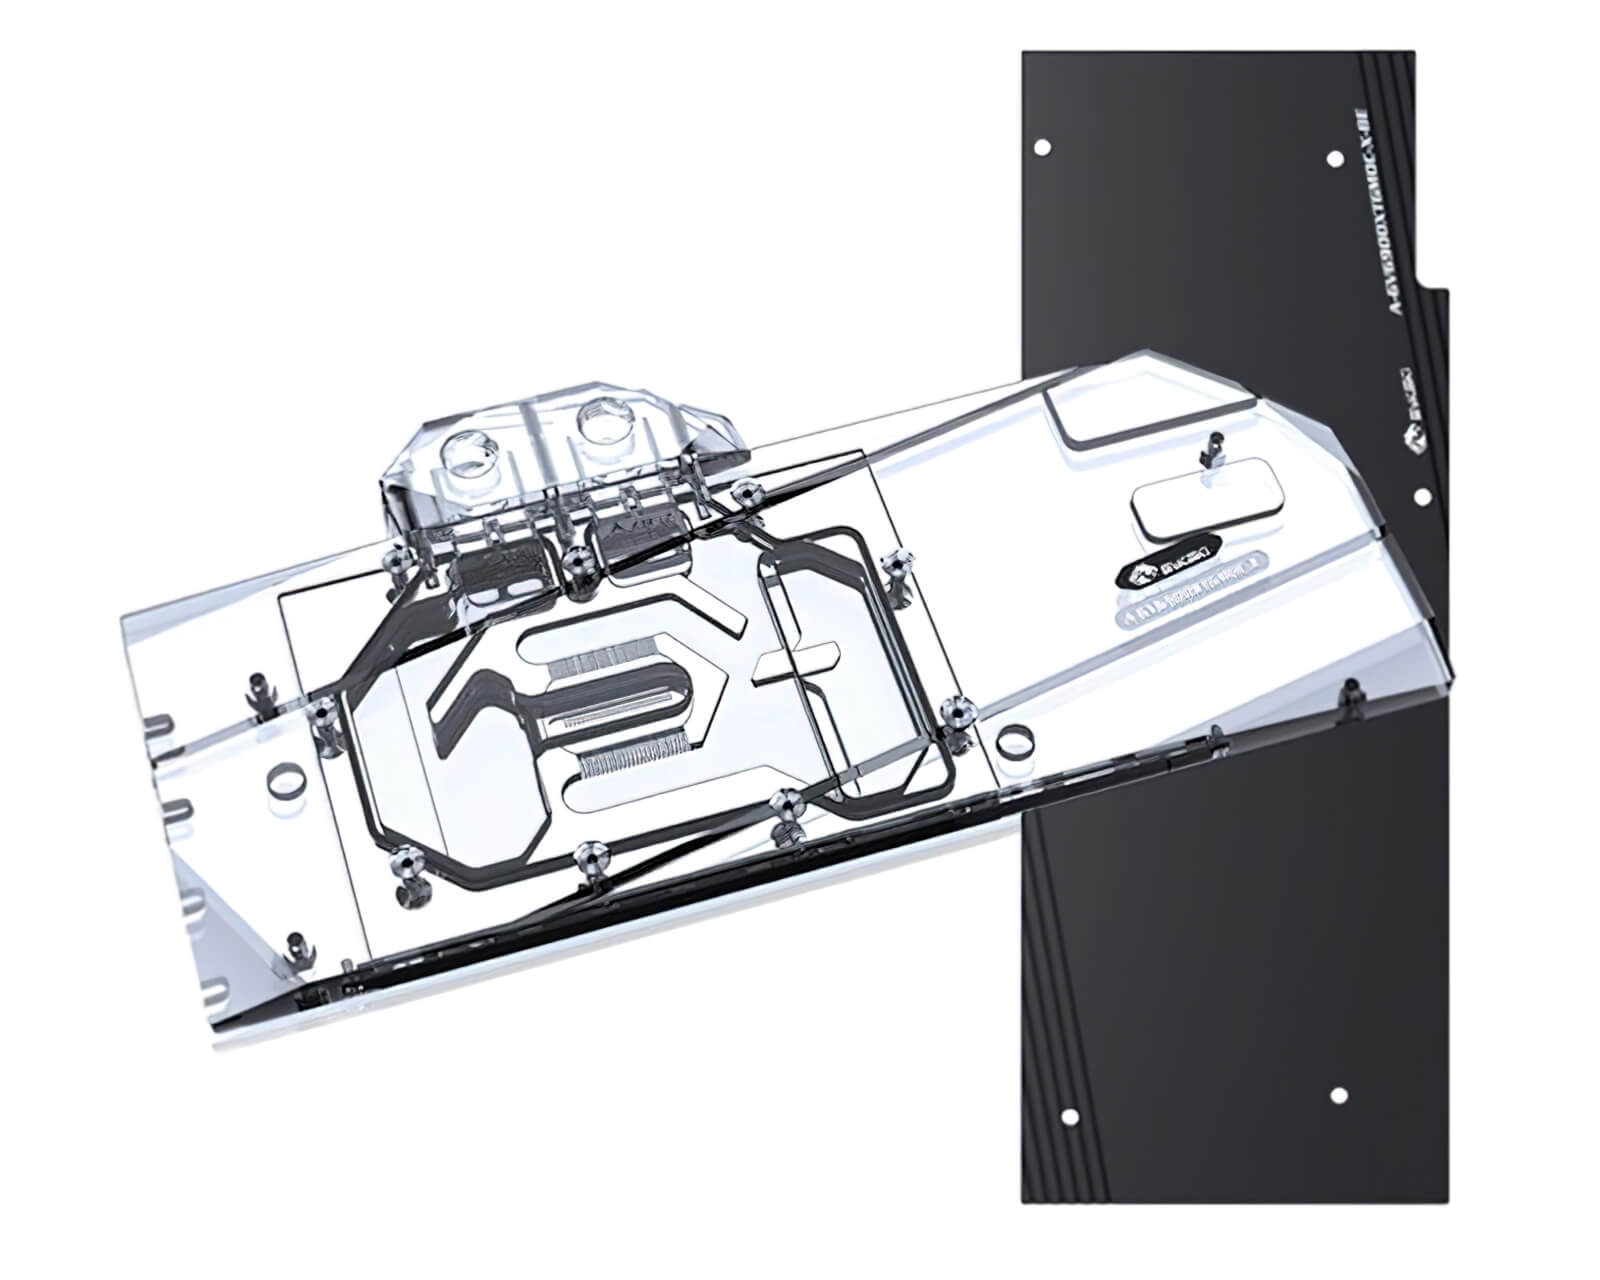 Bykski Full Coverage GPU Water Block and Backplate for Gigabyte RX 6900XT Gaming OC (A-GV6900XTGMOC-X) - PrimoChill - KEEPING IT COOL